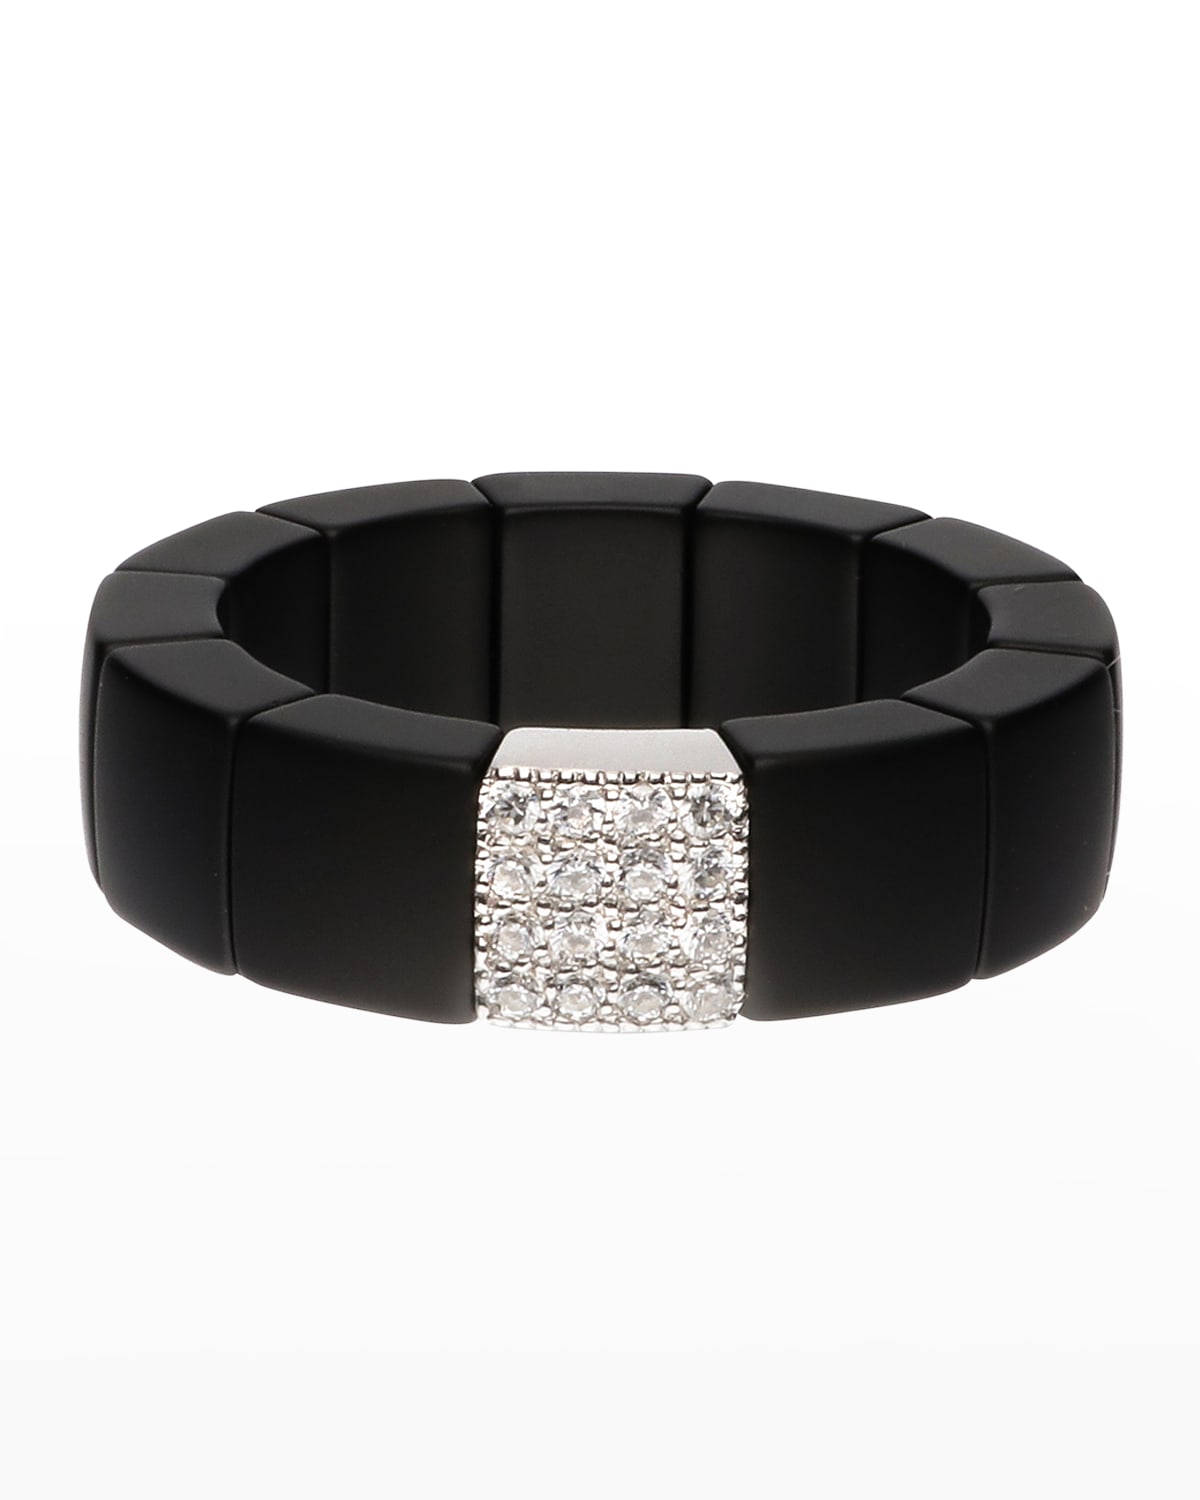 White Gold and Matte Black Ceramic Scacco Stretch Ring with One Diamond Section